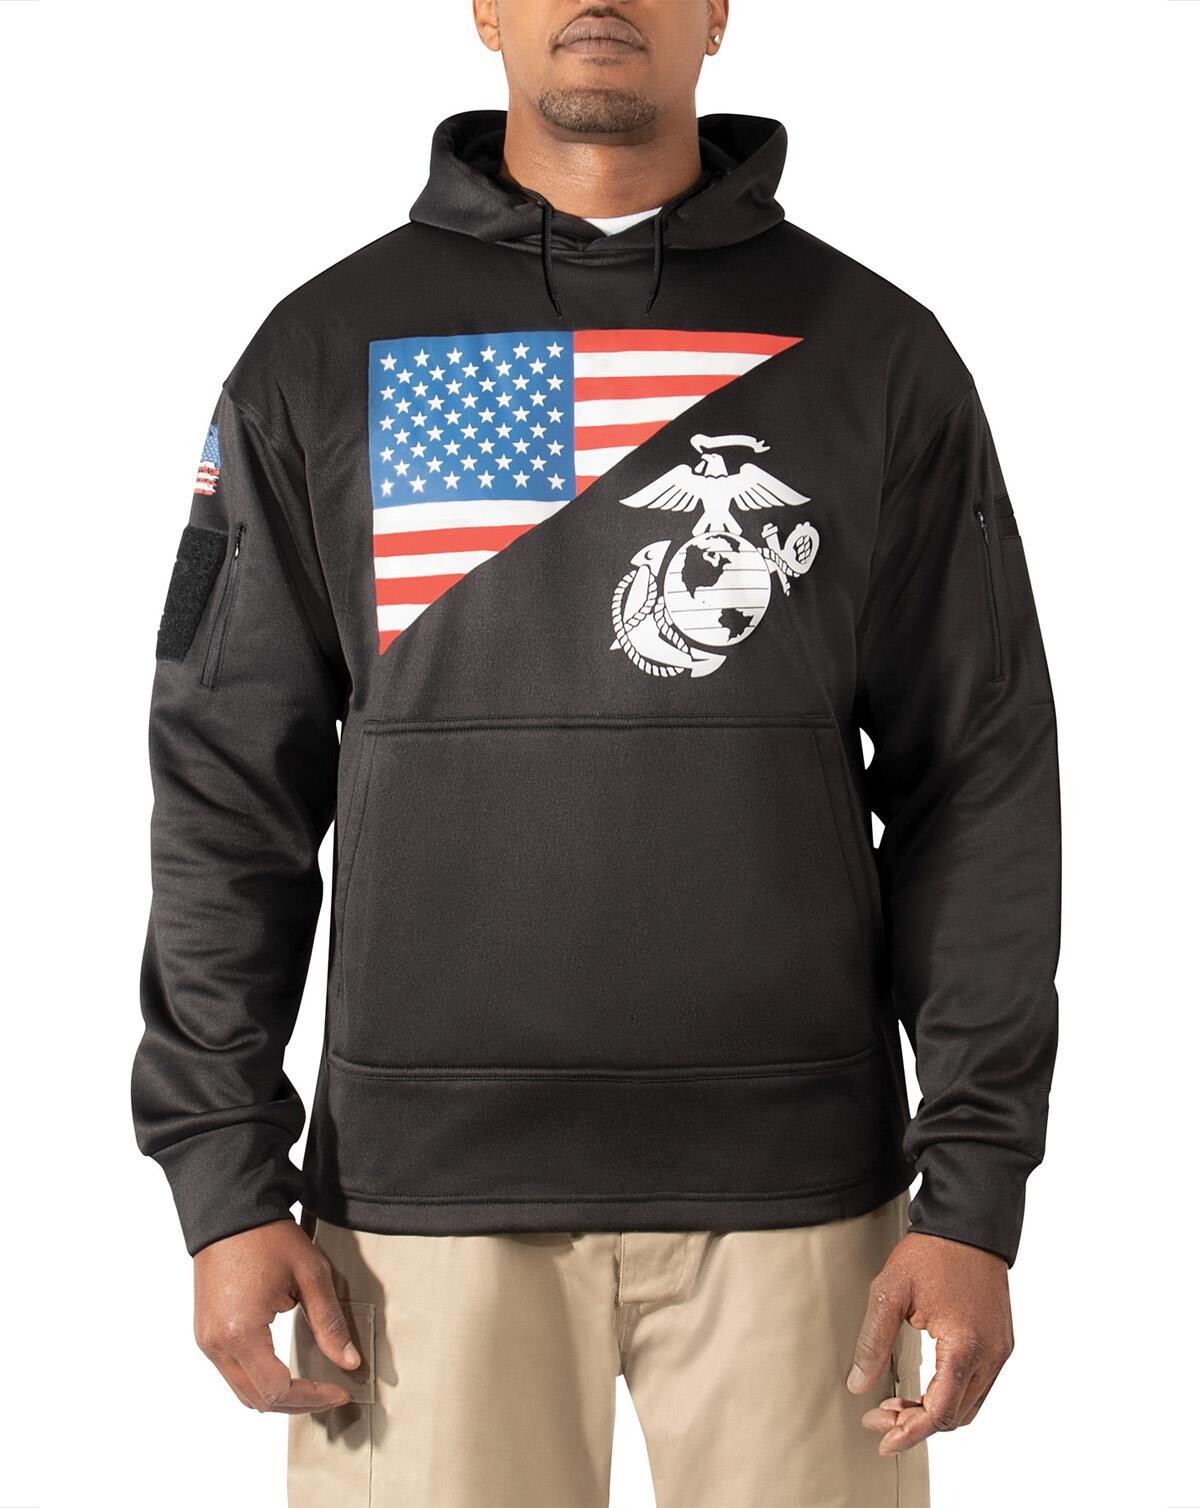 Rothco US Flag Concealed Carry Hoodie (Sort, XL)